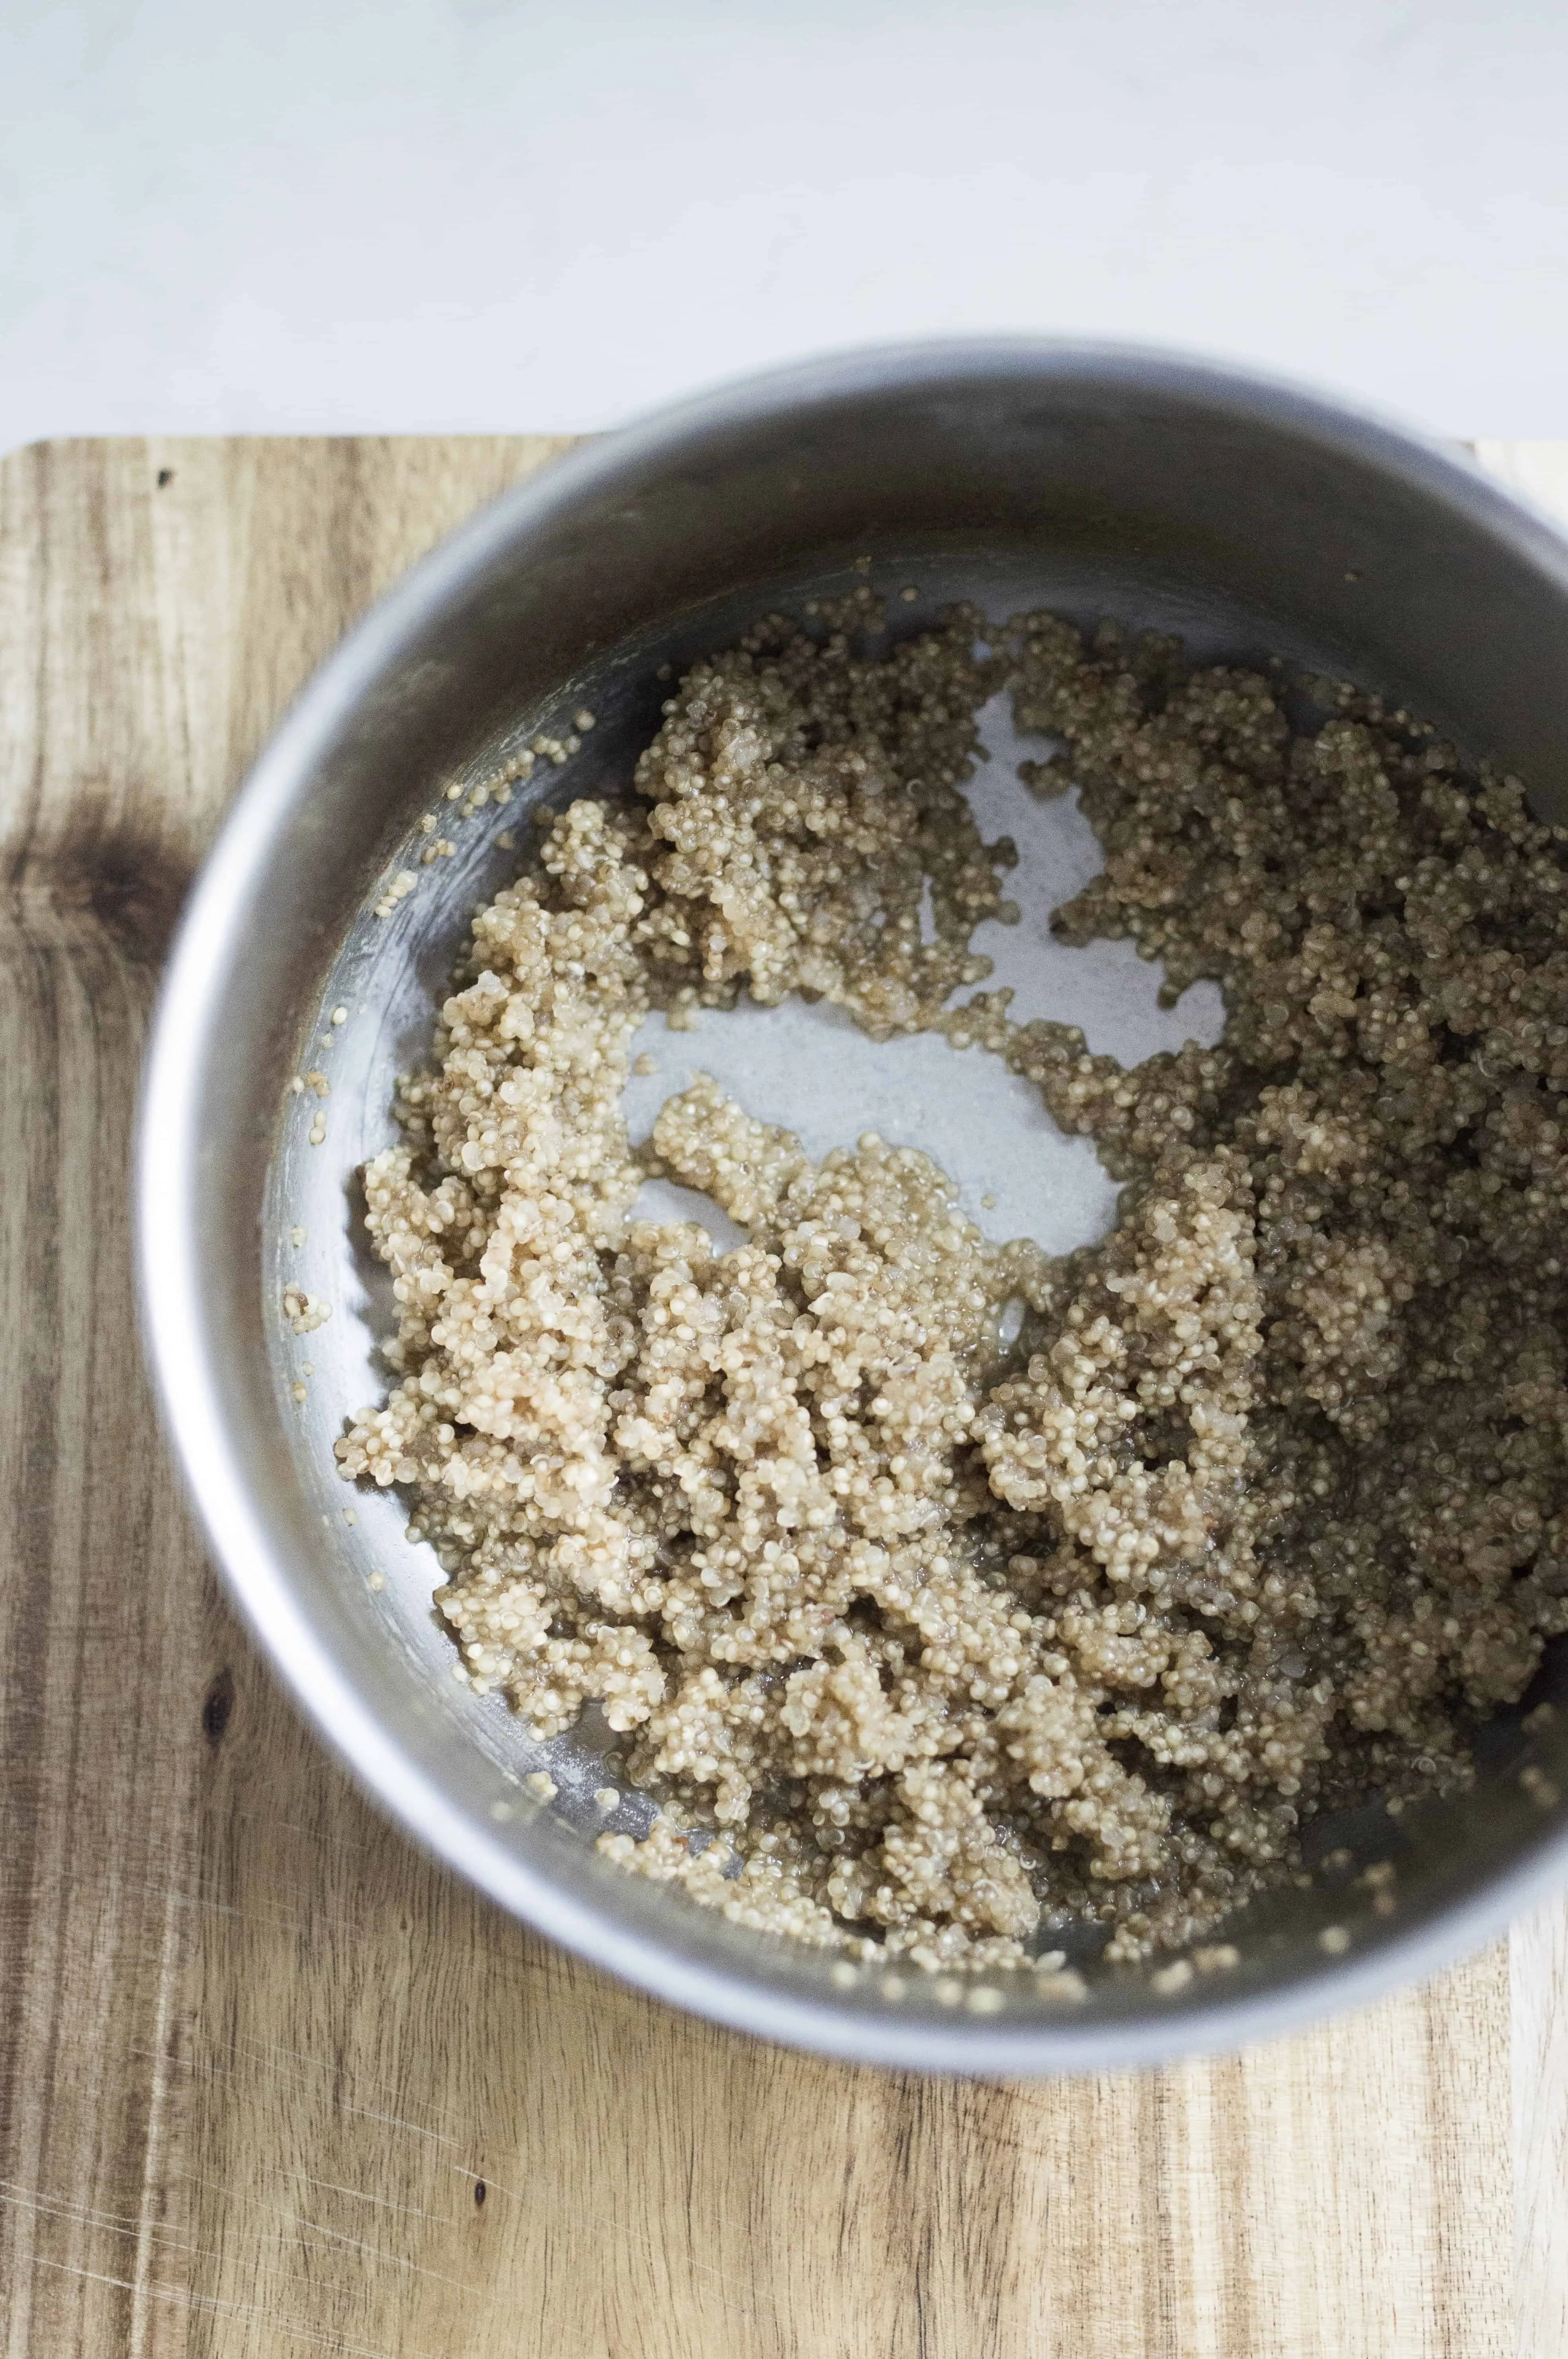 Saucepan of quinoa that has failed to cook properly